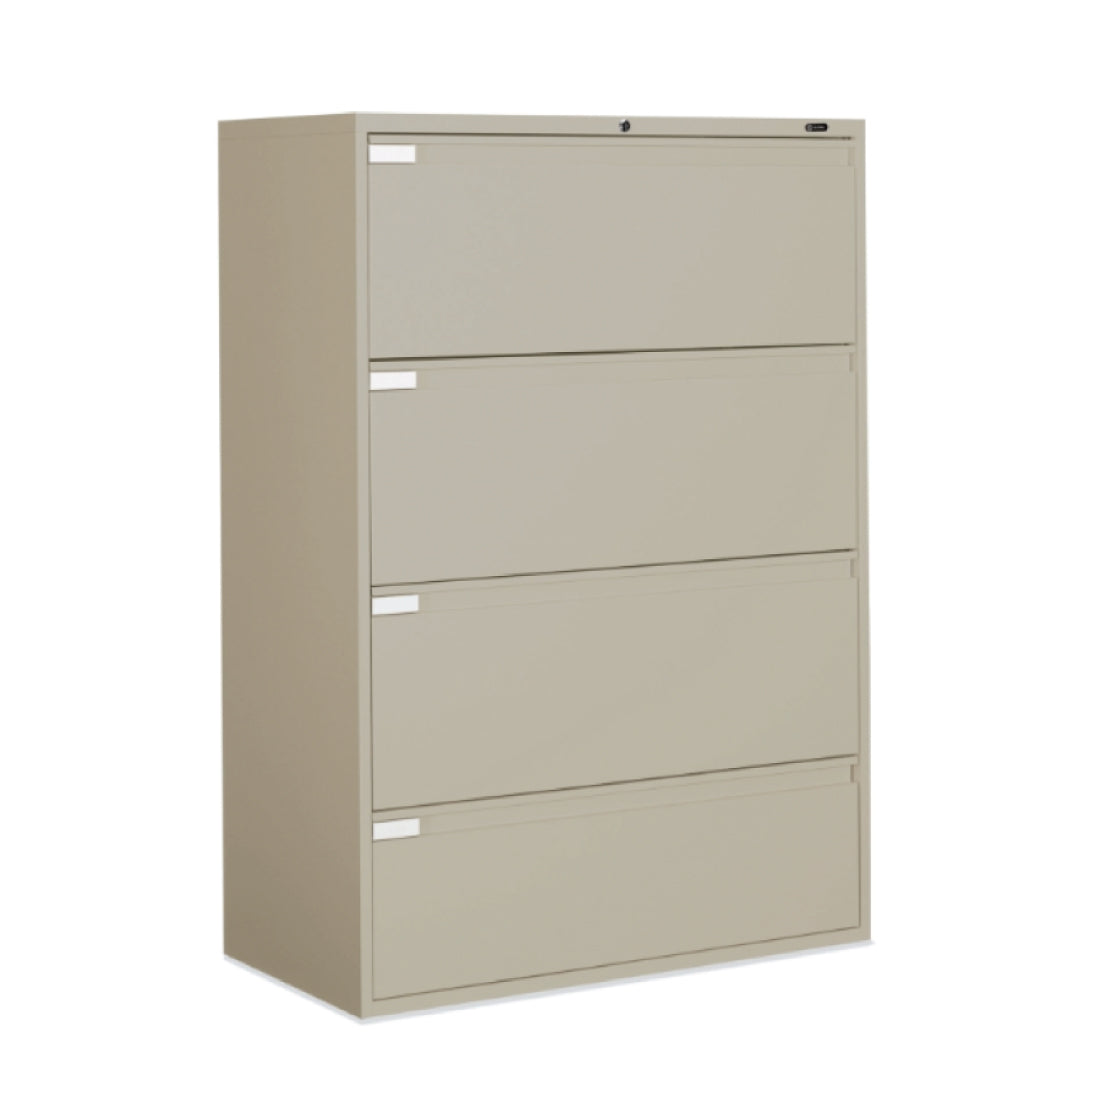 4 Drawer Lateral File (42"W) - Kainosbuy.com